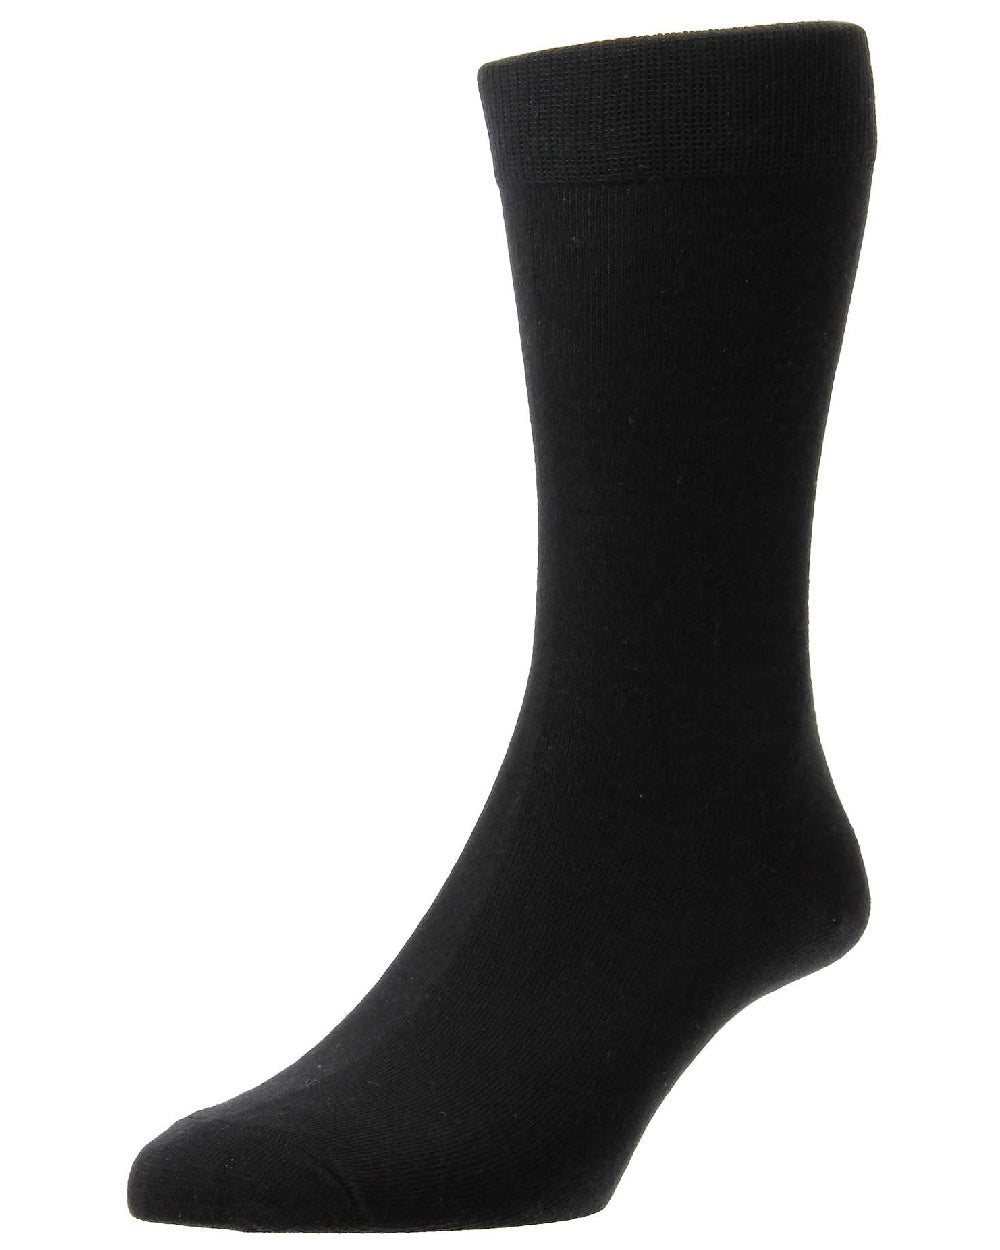 HJ Hall Allerton Supersoft Bamboo in Black 